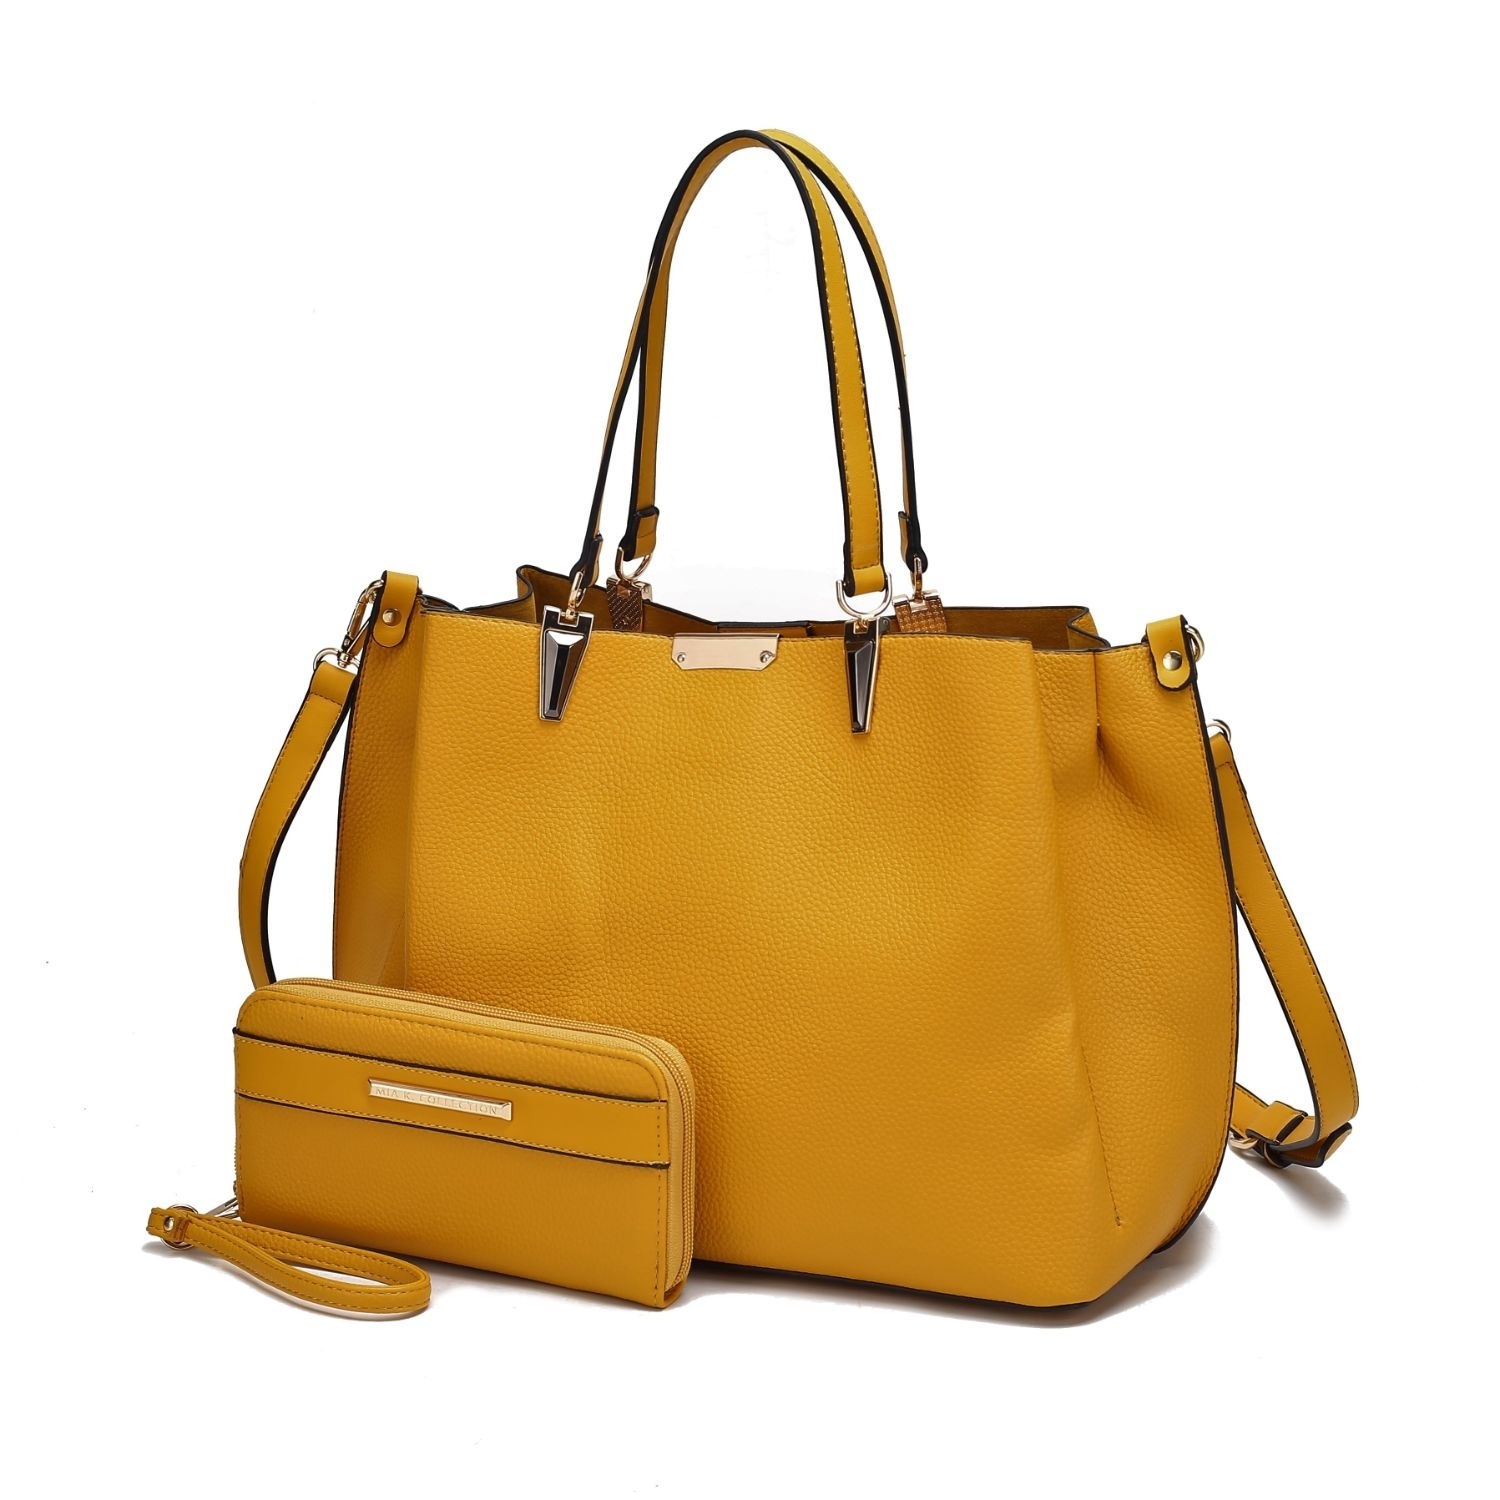 MKF Collection Kane Vegan Leather Women’s Satchel Bag With Wallet By Mia K – 2 Pieces - Mustard Yellow